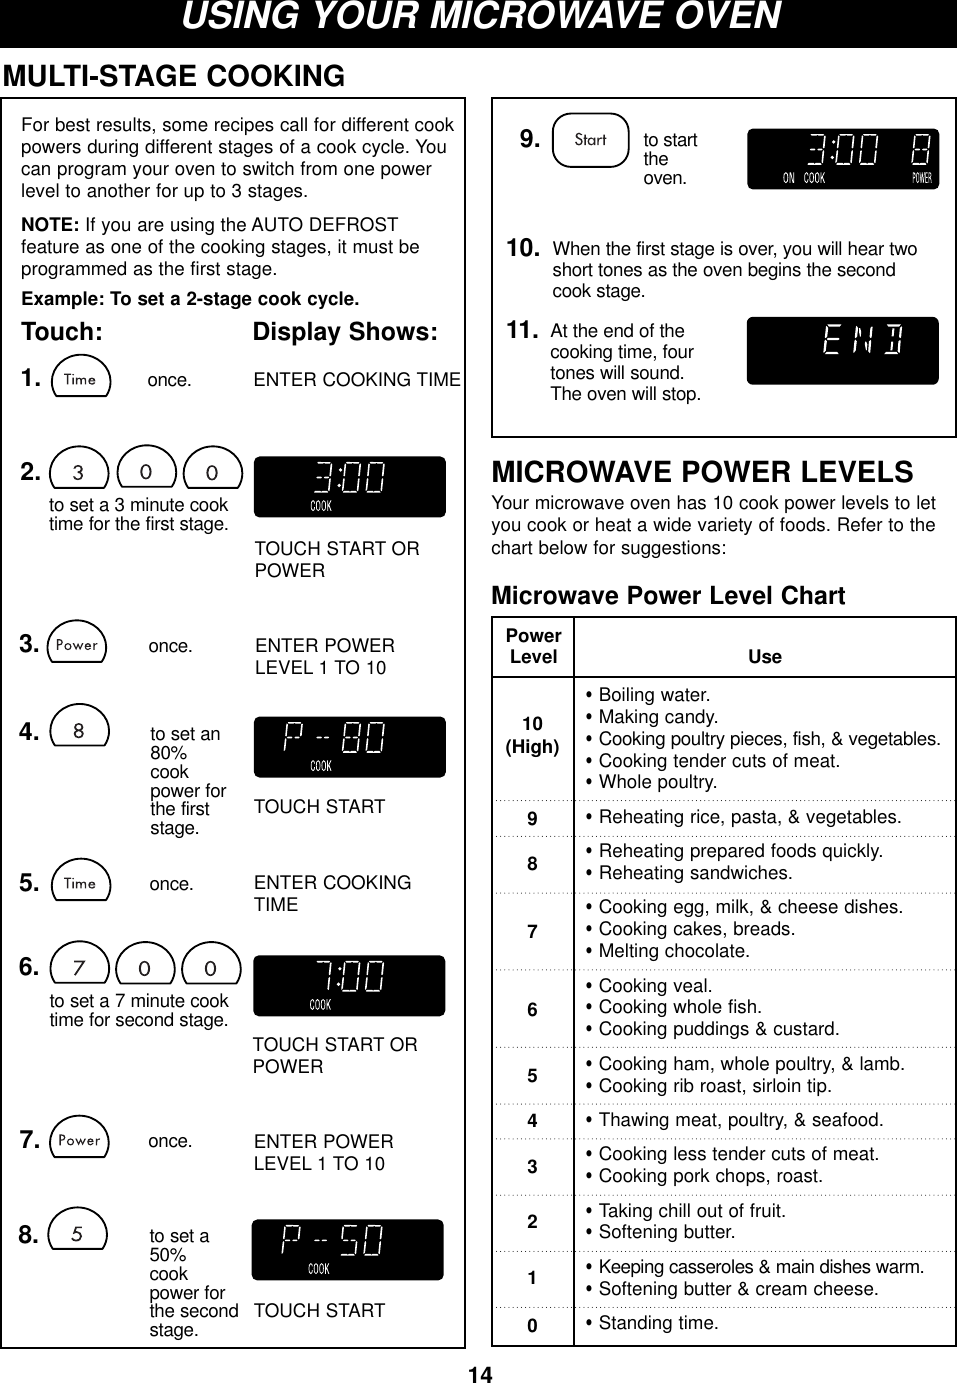 14USING YOUR MICROWAVE OVENMICROWAVE POWER LEVELSYour microwave oven has 10 cook power levels to letyou cook or heat a wide variety of foods. Refer to thechart below for suggestions:Microwave Power Level Chart•Boiling water.•Making candy.•Cooking poultry pieces, fish, &amp; vegetables.•Cooking tender cuts of meat.•Whole poultry.•Reheating rice, pasta, &amp; vegetables.•Reheating prepared foods quickly.•Reheating sandwiches.•Cooking egg, milk, &amp; cheese dishes.•Cooking cakes, breads.•Melting chocolate.•Cooking veal.•Cooking whole fish.•Cooking puddings &amp; custard.•Cooking ham, whole poultry, &amp; lamb.•Cooking rib roast, sirloin tip.•Thawing meat, poultry, &amp; seafood.•Cooking less tender cuts of meat.•Cooking pork chops, roast.•Taking chill out of fruit.•Softening butter.•Keeping casseroles &amp; main dishes warm.•Softening butter &amp; cream cheese.•Standing time.10(High)9876543210UsePowerLevelFor best results, some recipes call for different cookpowers during different stages of a cook cycle. Youcan program your oven to switch from one powerlevel to another for up to 3 stages.NOTE: If you are using the AUTO DEFROSTfeature as one of the cooking stages, it must be programmed as the first stage.Example: To set a 2-stage cook cycle.Touch: Display Shows:MULTI-STAGE COOKING1.2.5. once.once.3. once.4. to set an80% cookpower for the firststage.to set a 3 minute cook time for the first stage.6.to set a 7 minute cook time for second stage.7. once.8. to set a50% cookpower for the second stage.9.At the end of the cooking time, fourtones will sound.The oven will stop.to startthe oven.11.When the first stage is over, you will hear twoshort tones as the oven begins the secondcook stage.10.ENTER COOKING TIMETOUCH START ORPOWERENTER POWERLEVEL 1 TO 10ENTER COOKINGTIMETOUCH START ORPOWERENTER POWERLEVEL 1 TO 10TOUCH STARTTOUCH START